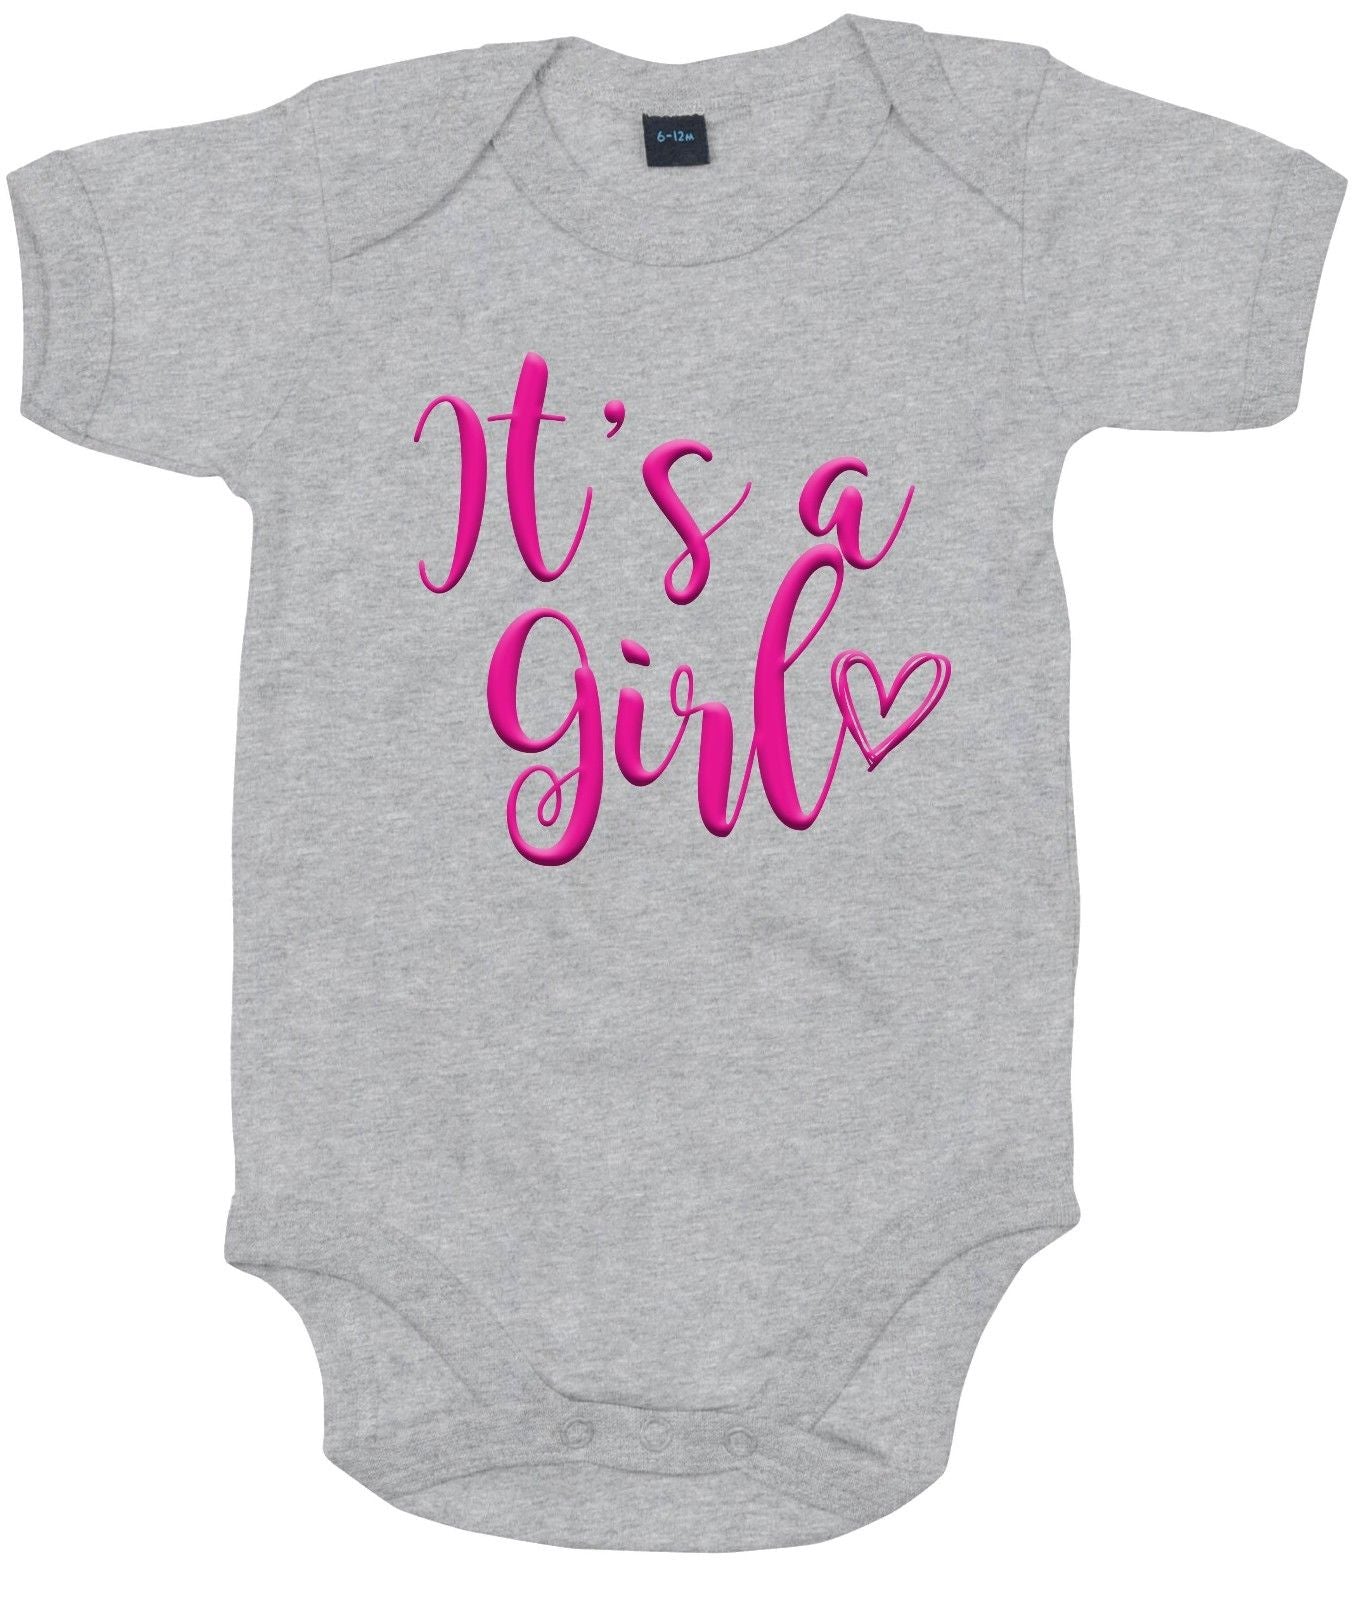 its a girl baby grow